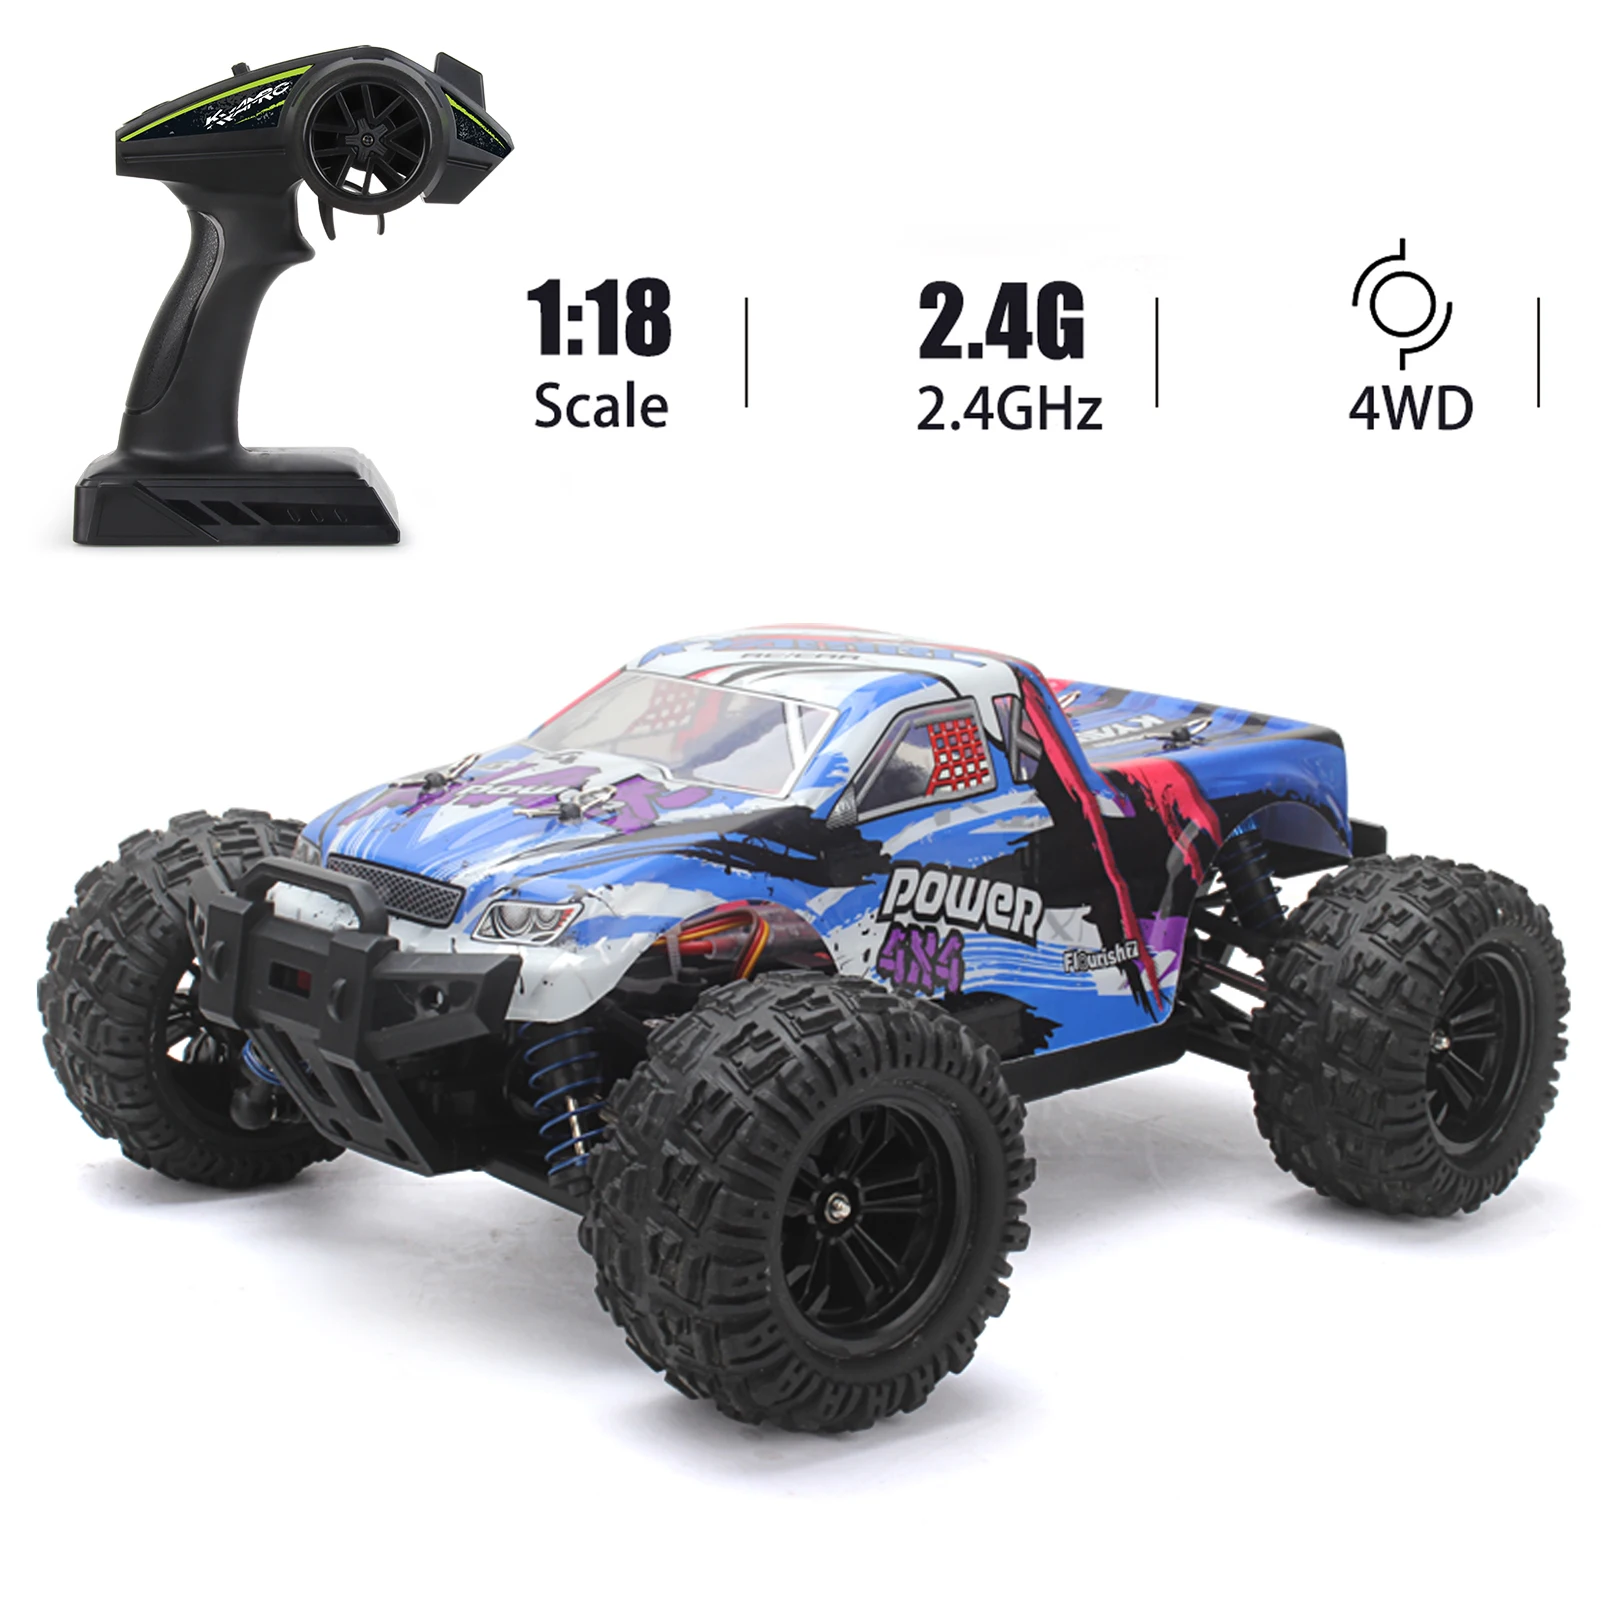 

KYAMRC KY-2819A 1:18 RC Car All Terrain 2.4GHz 4WD Off-Road Remote Control Crawler Truck 35KM/H High Speed Racing Vehicle Gift